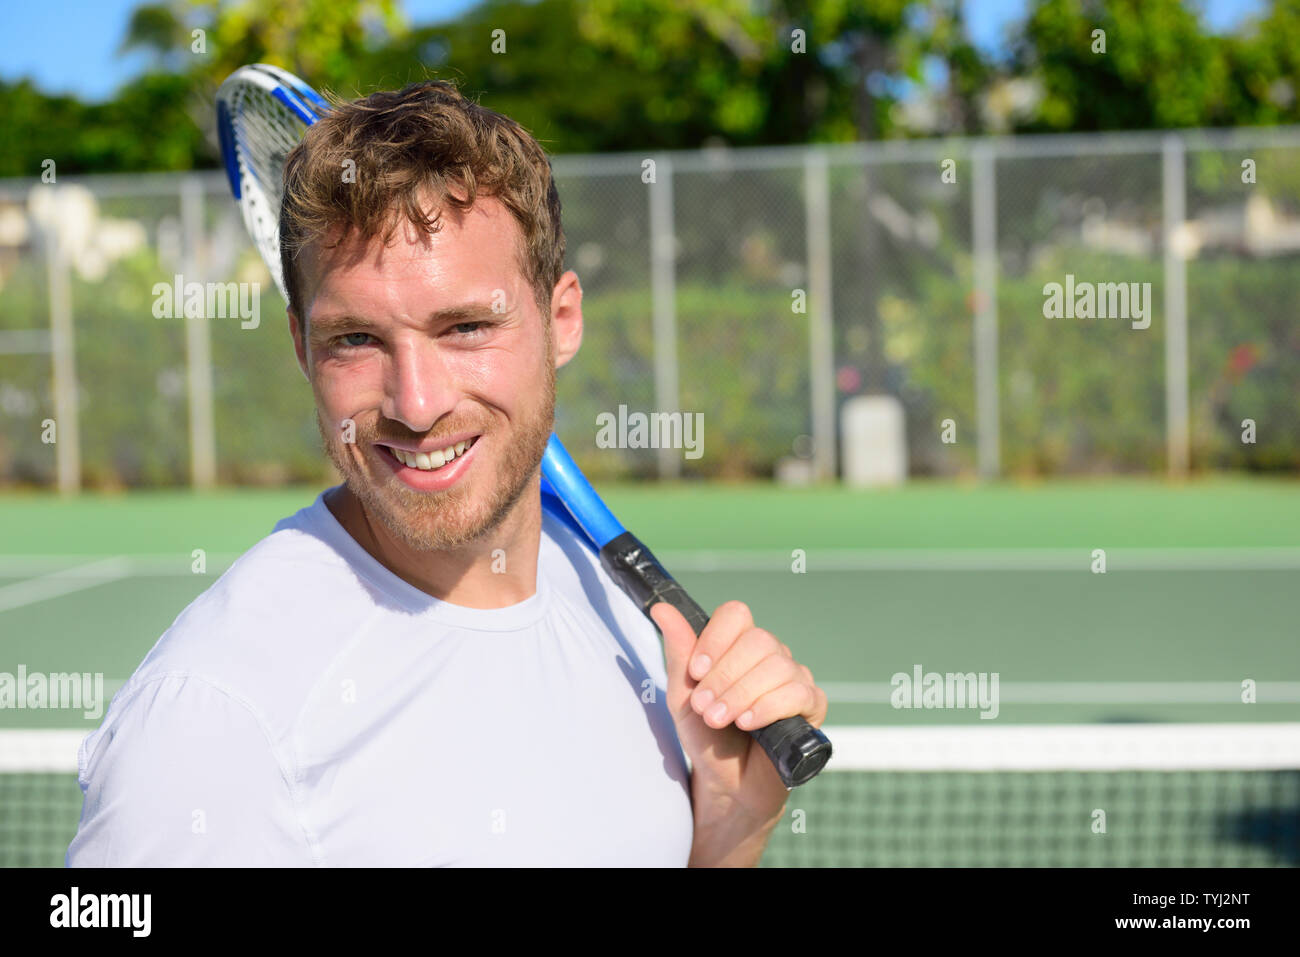 Portrait of male tennis player holding tennis racket after playing at game outside on hard court in summer. Fit man sport fitness athlete smiling happy living healthy active lifestyle outside. Stock Photo